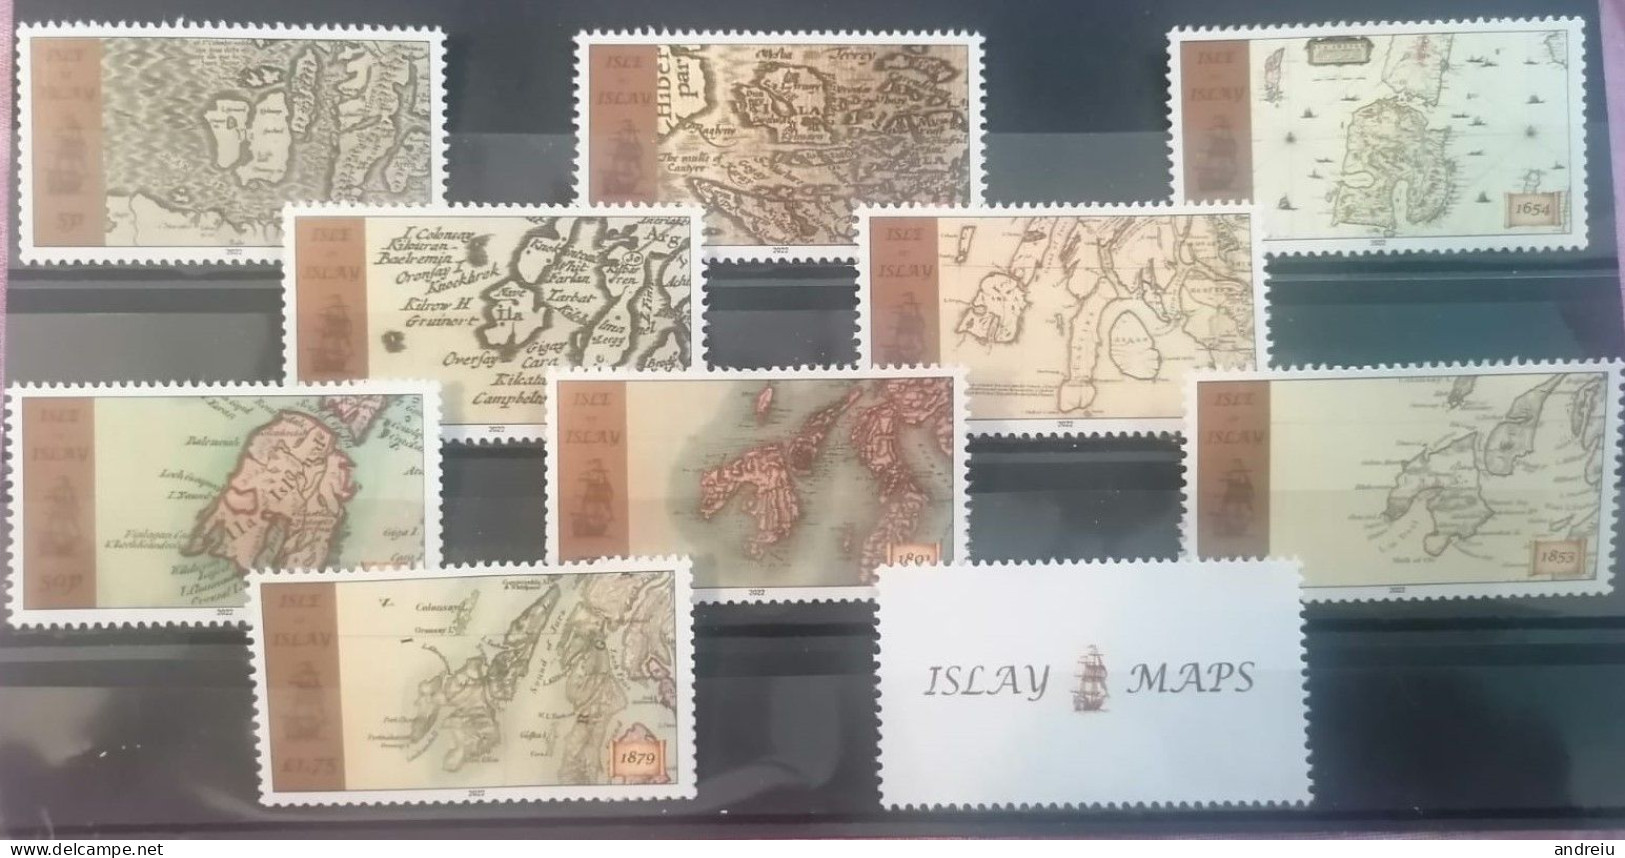 2022 GB Locals: Isle Of Islay - Old Maps Of Islay 9v+label, Geography, Cartes, Karten, Mapas MNH - Isole